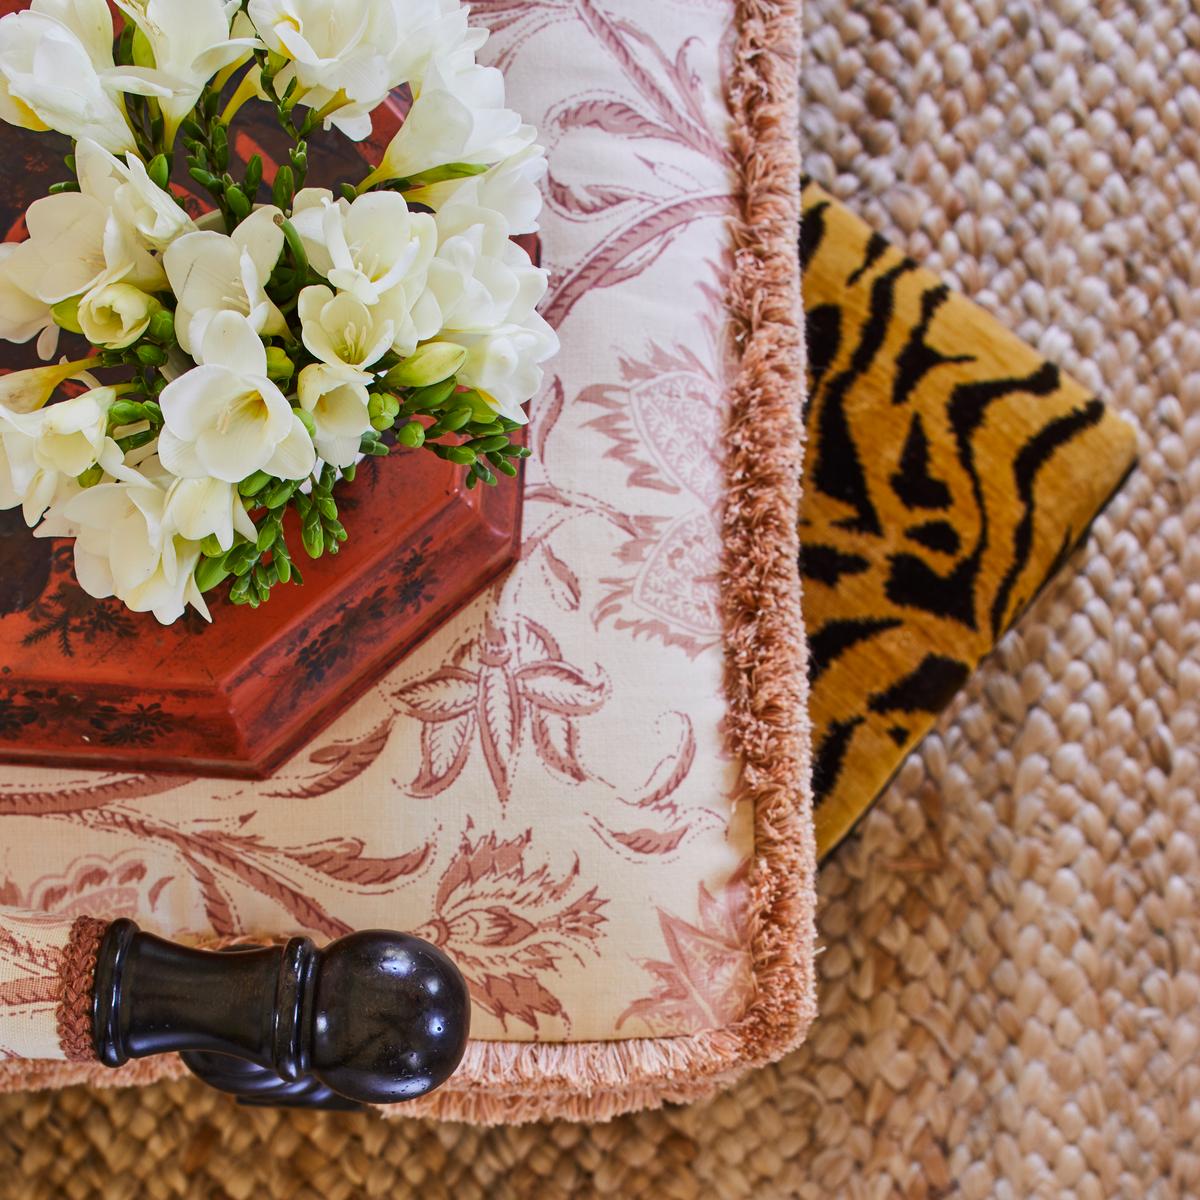 Unexpected pairings of patterns bring delight and offset expectations. Here, two-toned floral upholstery with whimsical seams plays host to a tiger print footstool. (Laurey Glenn)